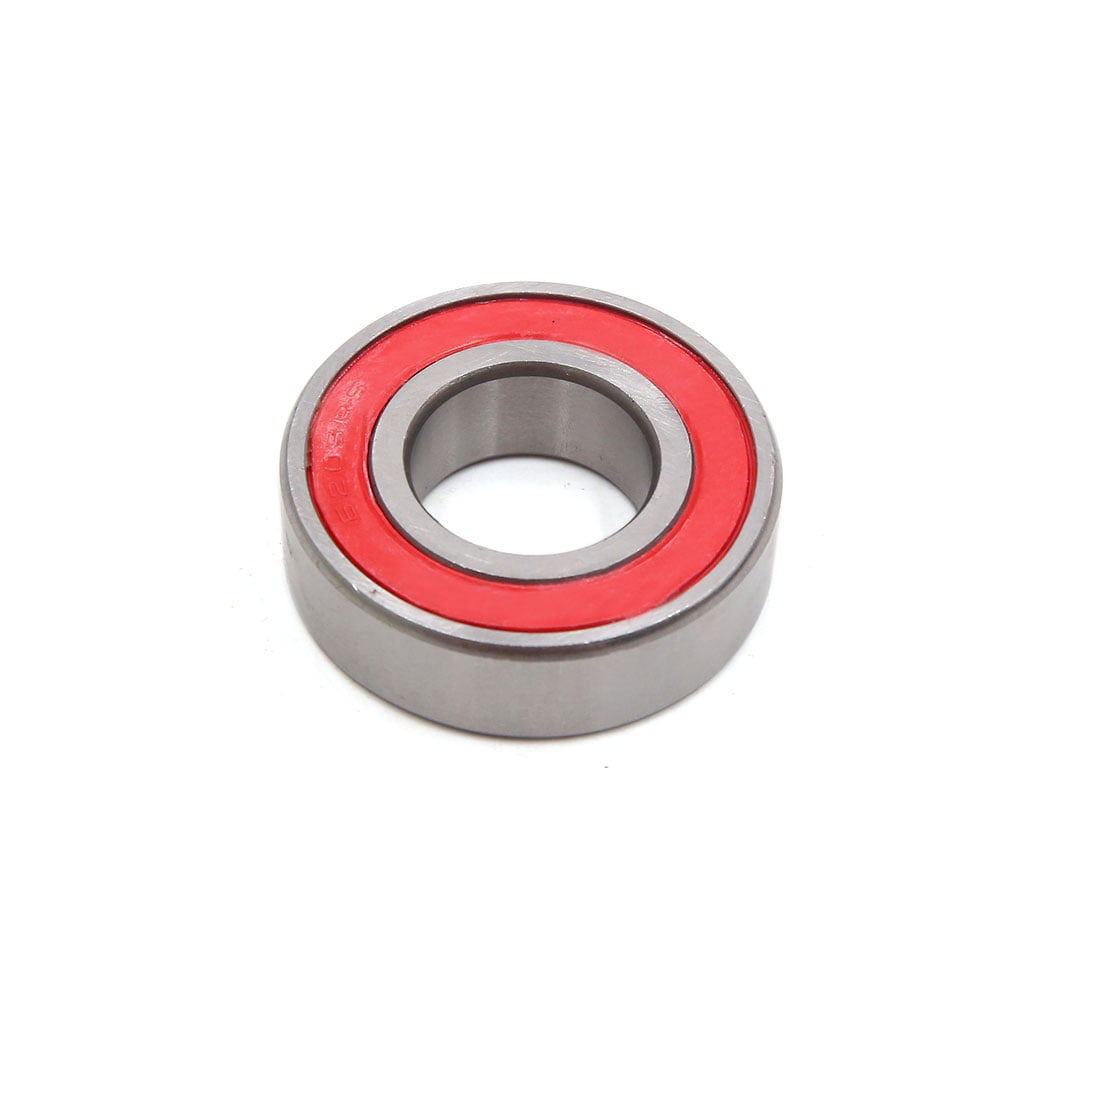 Stainles Steel S6205-2RS 6205 2RS bearings 25 x 52 x 15 